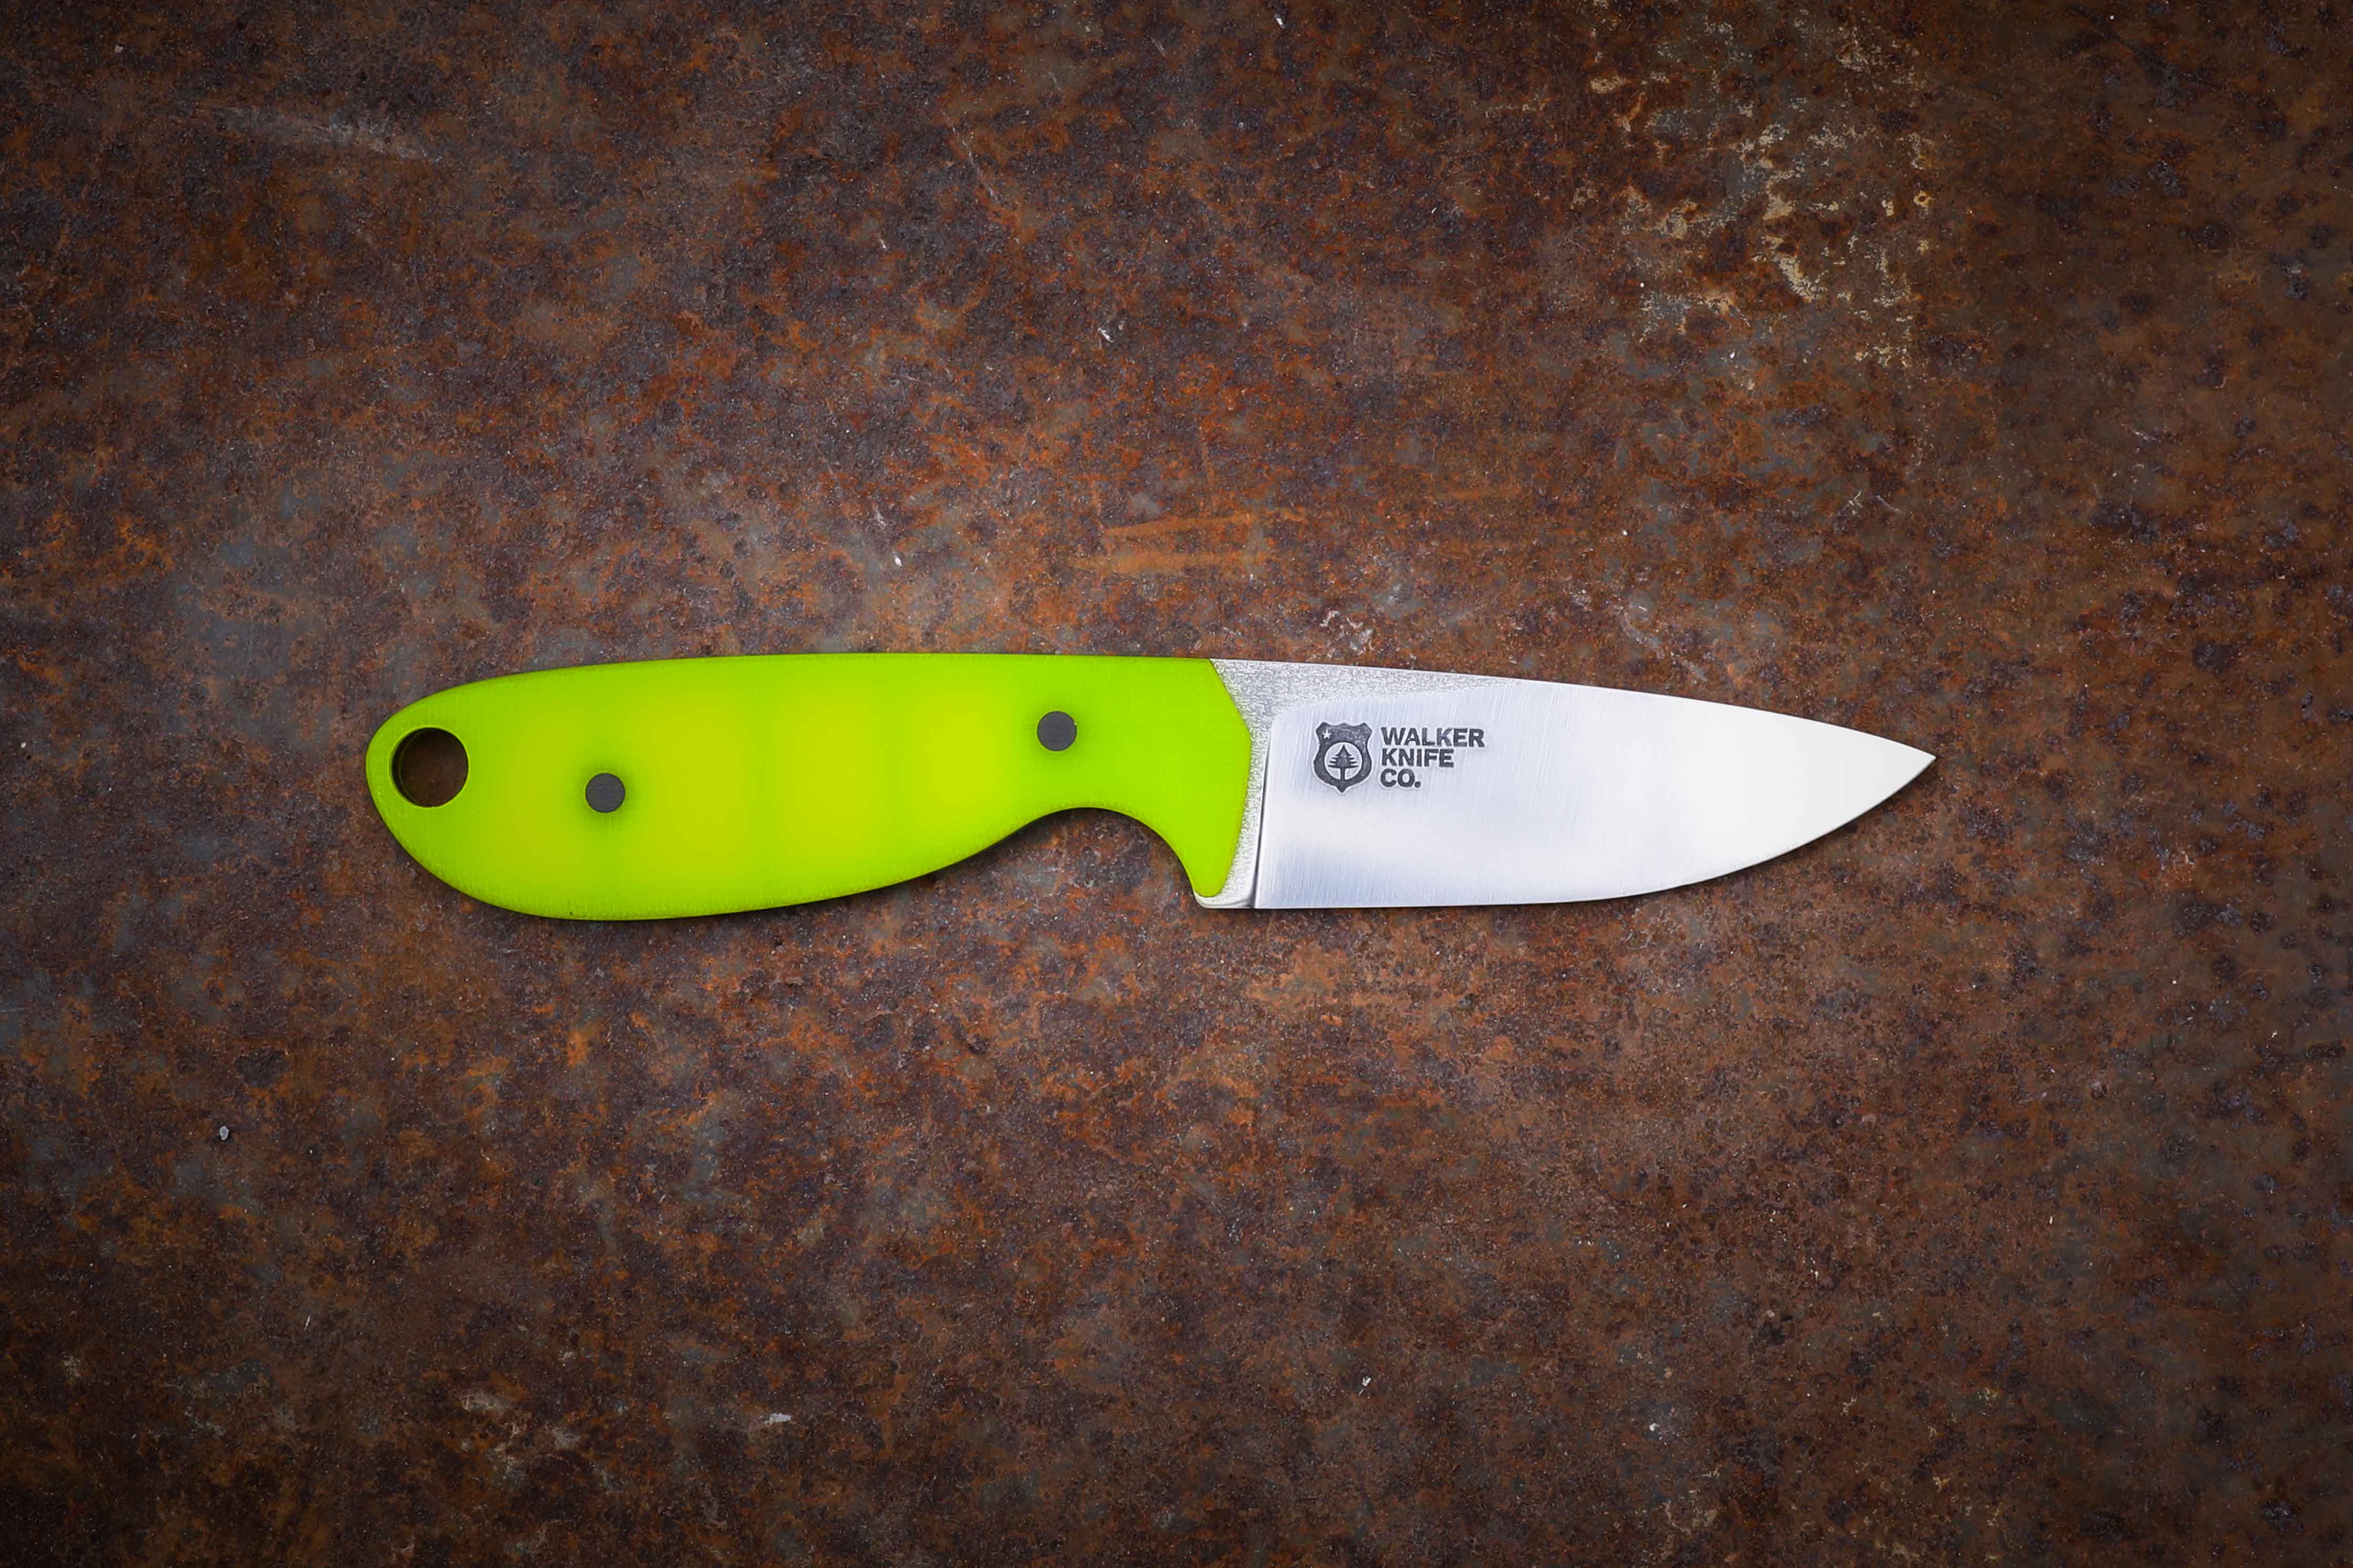 MagnaCut River Knife / Dayglow Yellow with Black Kydex Sheath